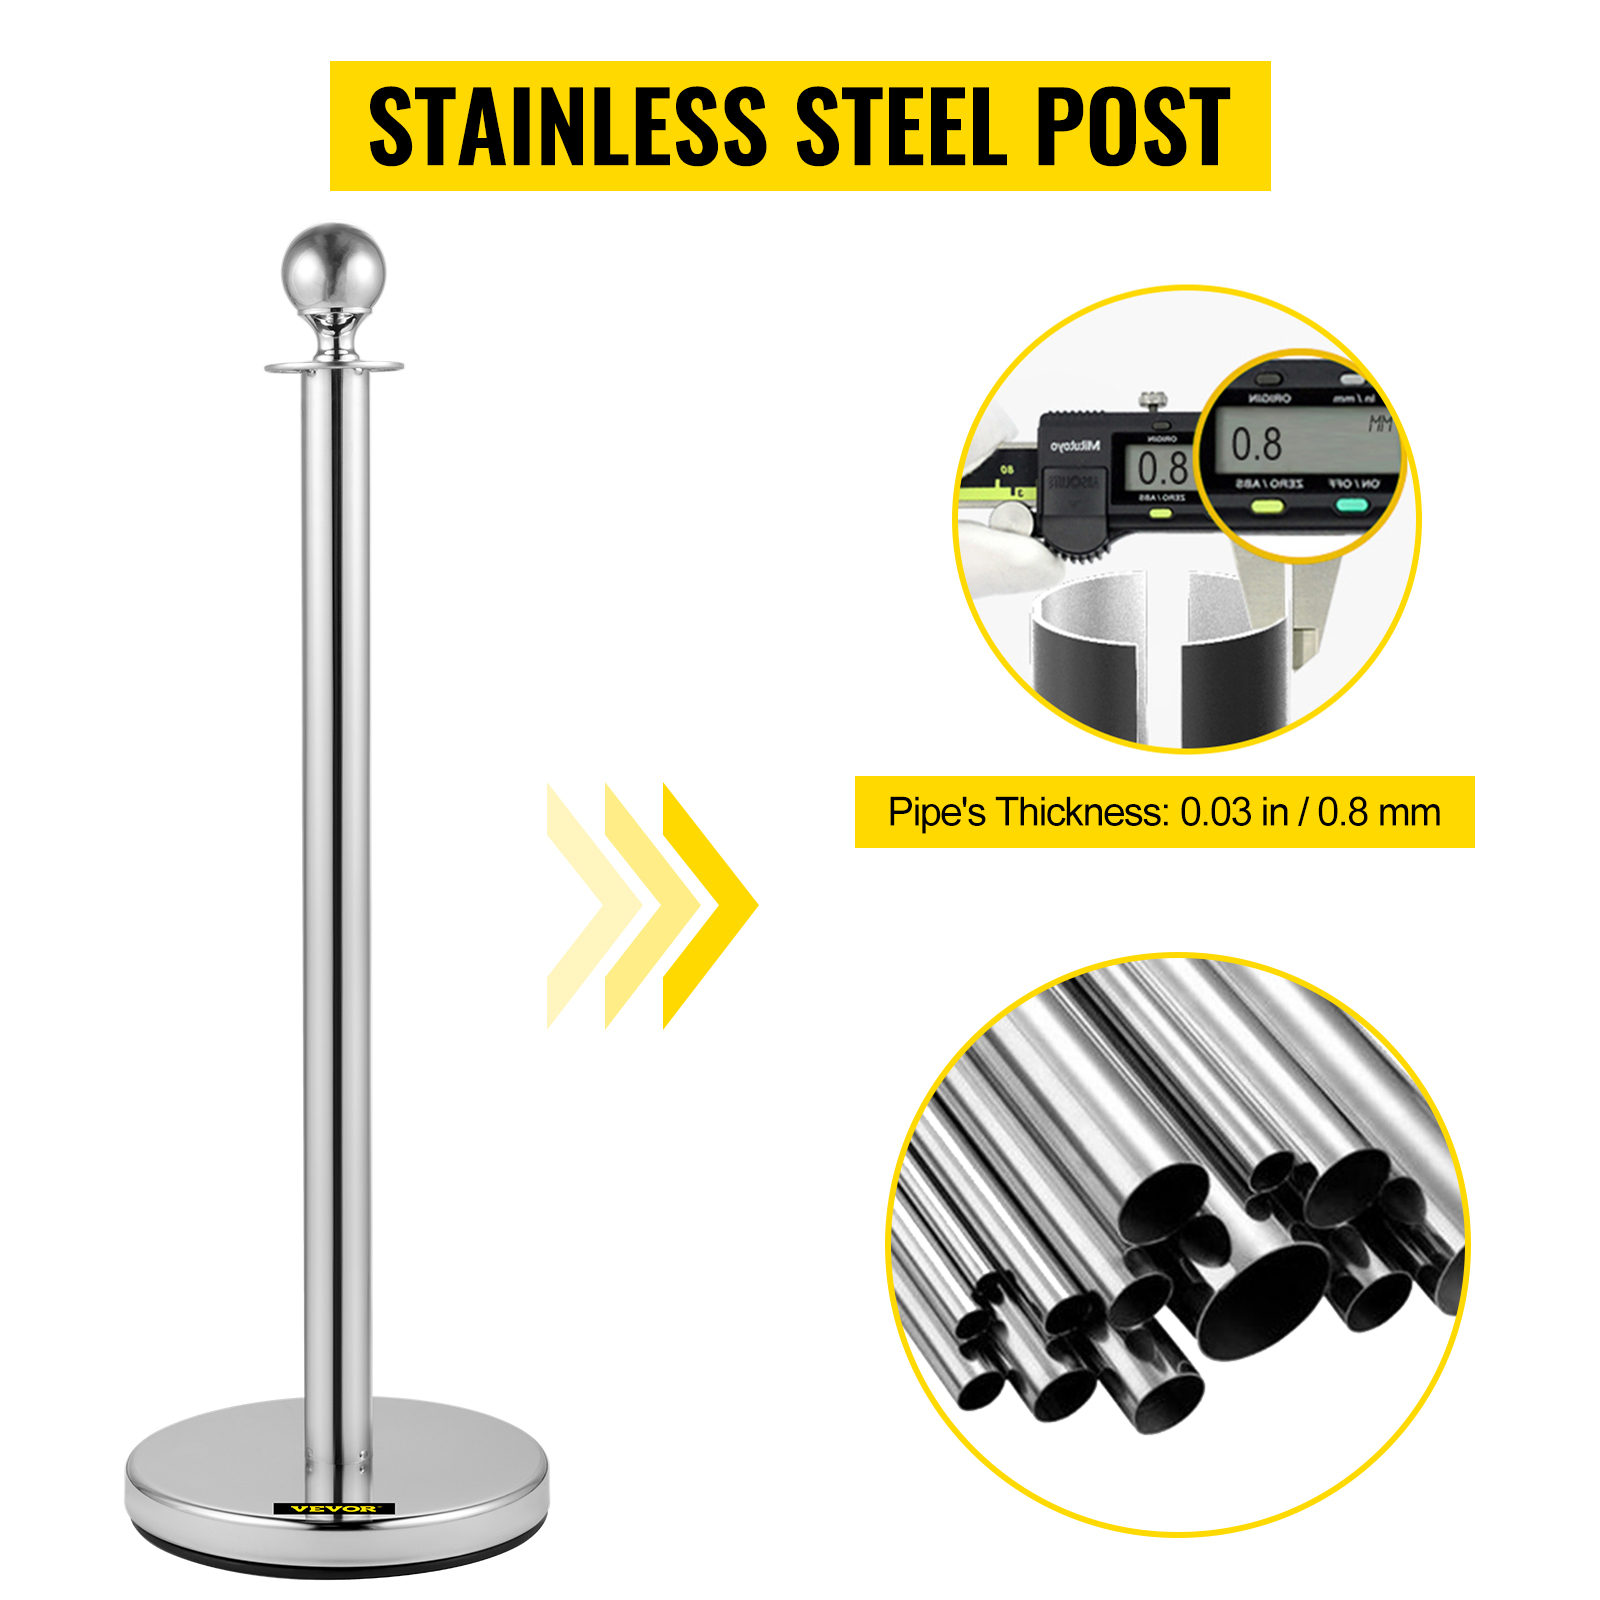 SILVER QUEUE CONTROL BARRIER POSTS STAND SECURITY STANCHION DIVIDER STEEL SET 